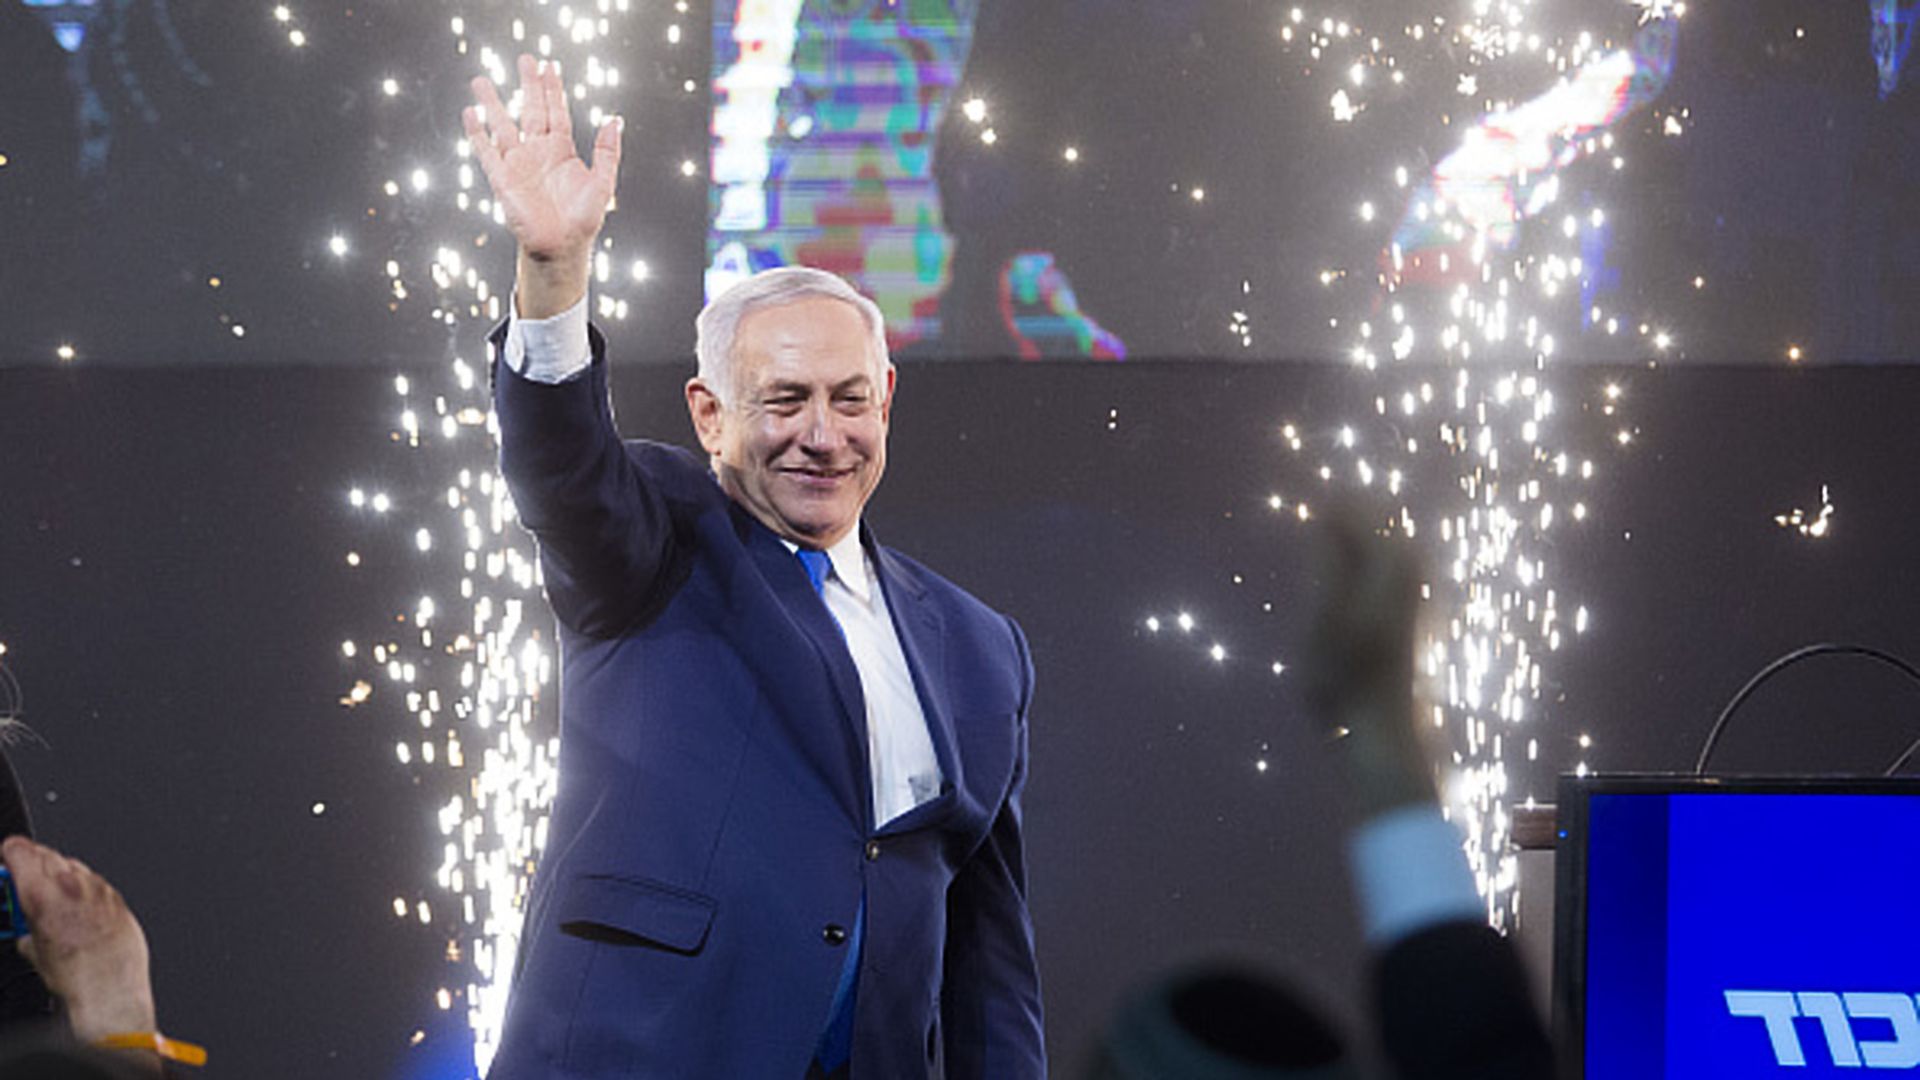 Israel's Prime Minister Benjamin Netanyahu has declared victory in the country's closely fought election.